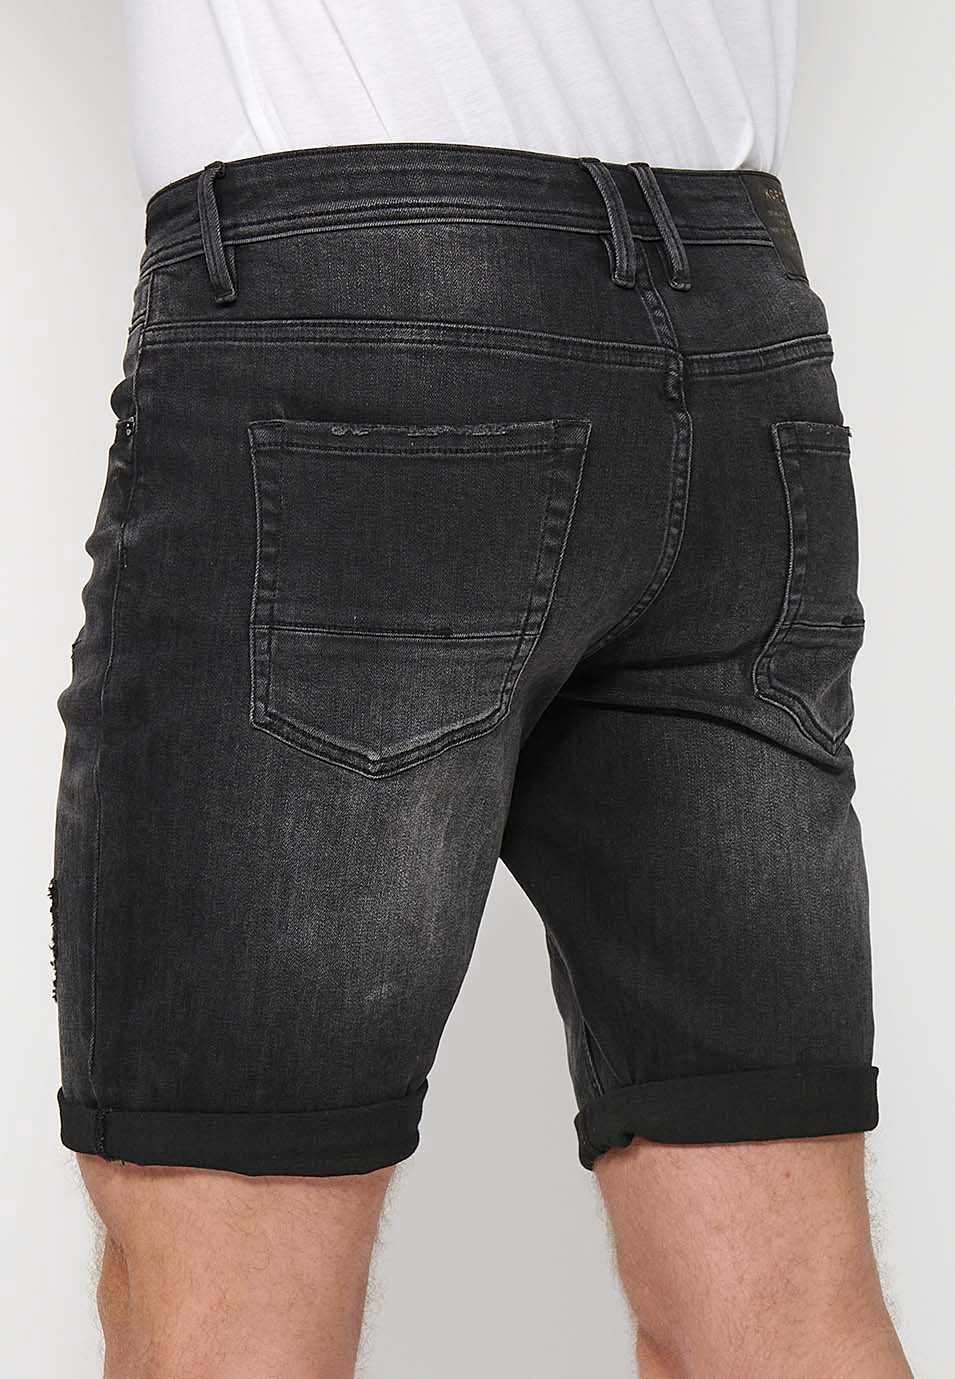 Black Denim Bermuda Shorts with Turn-Up Finish and Front Zipper and Button Closure for Men 8